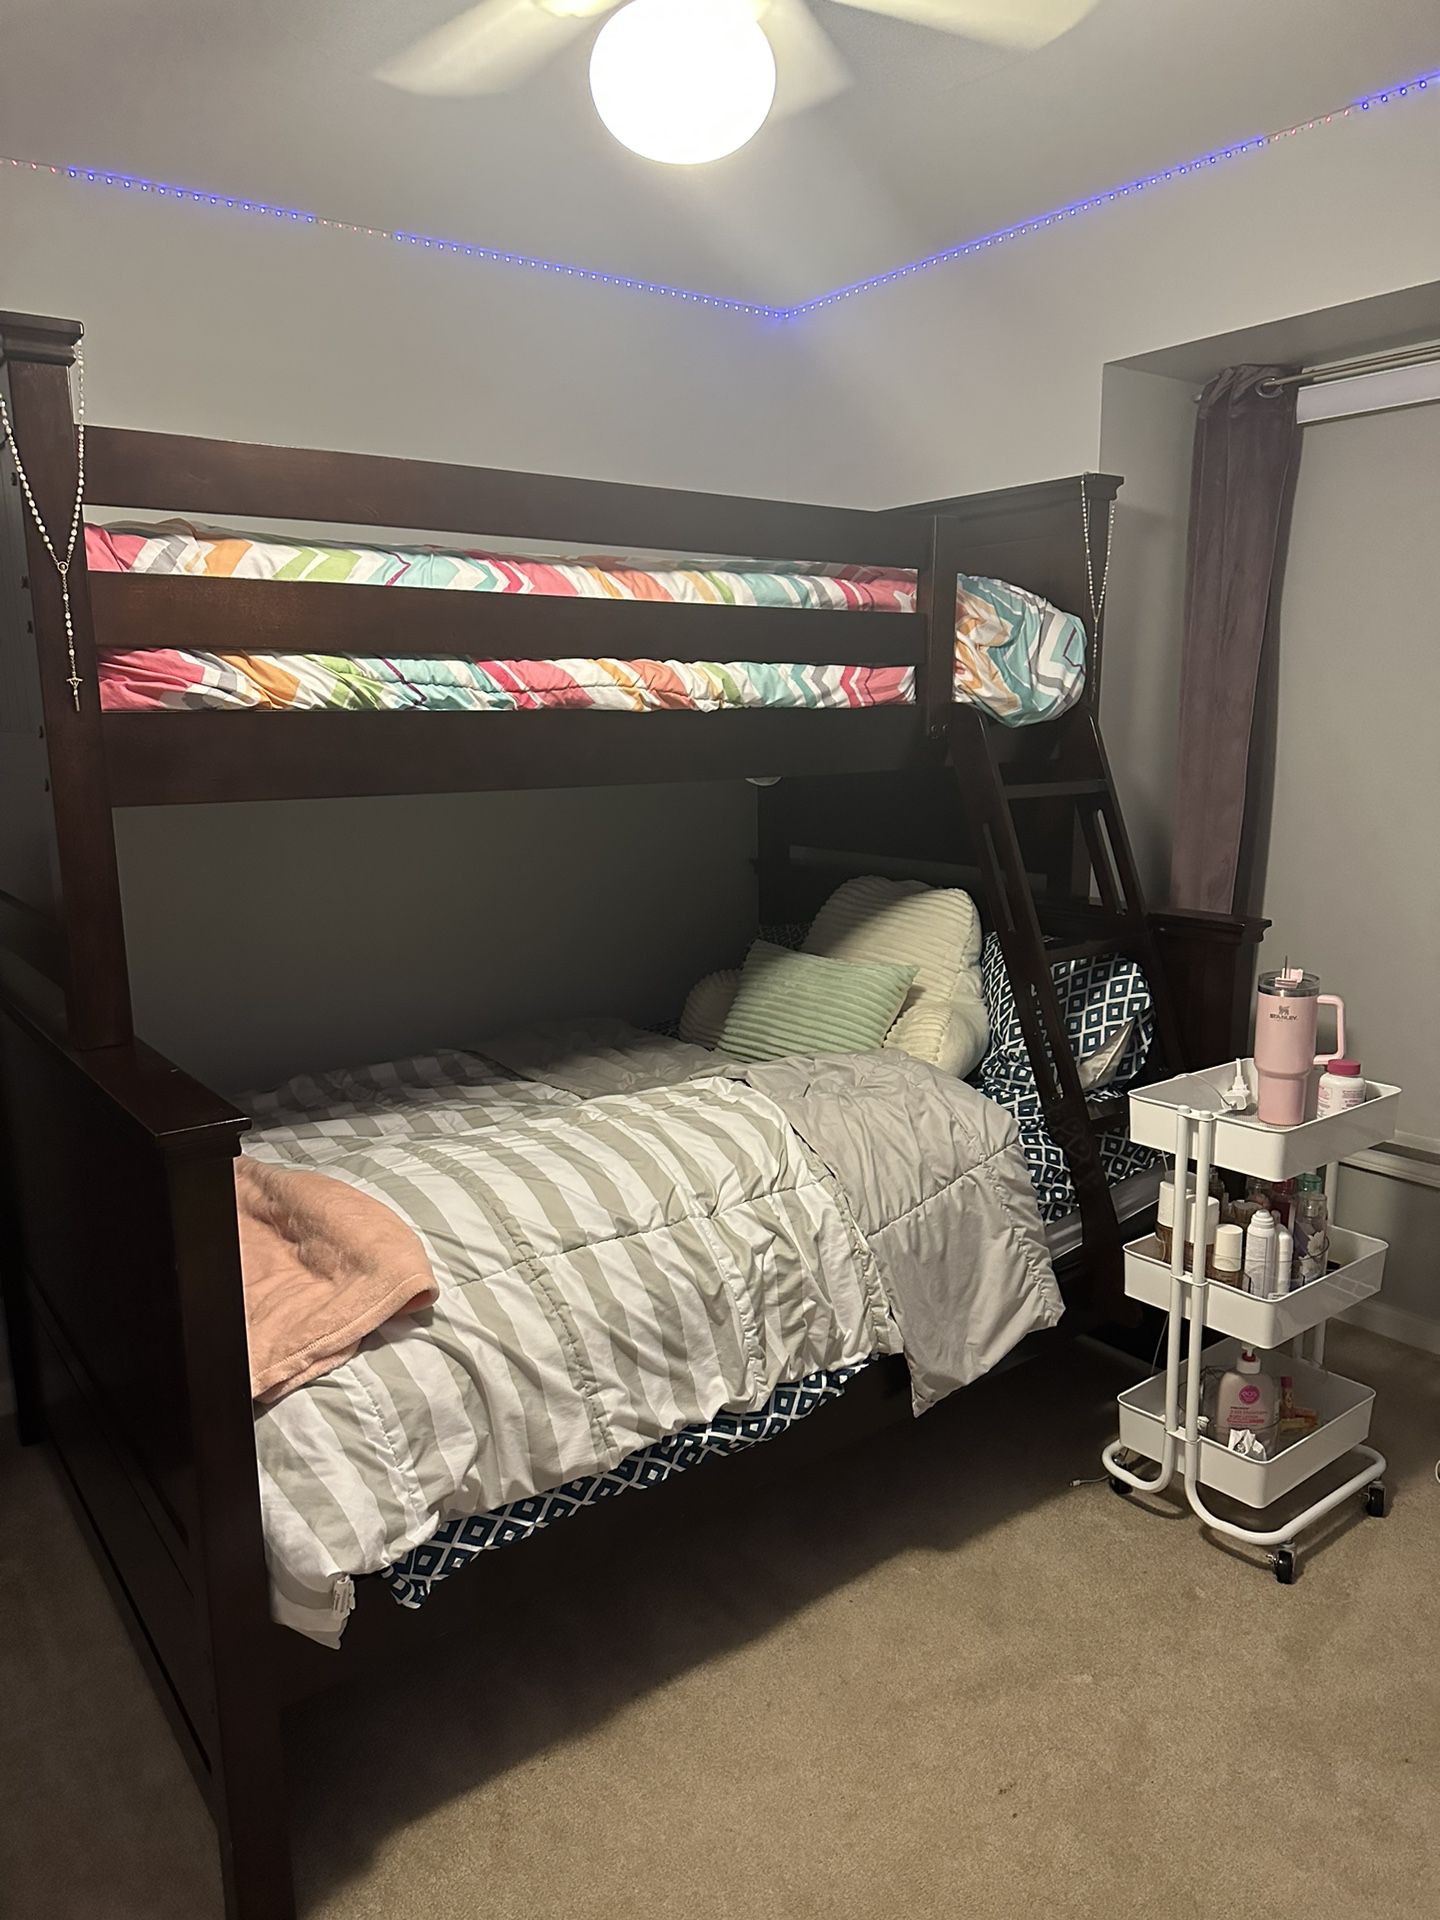 Bed Bunk With Stairs